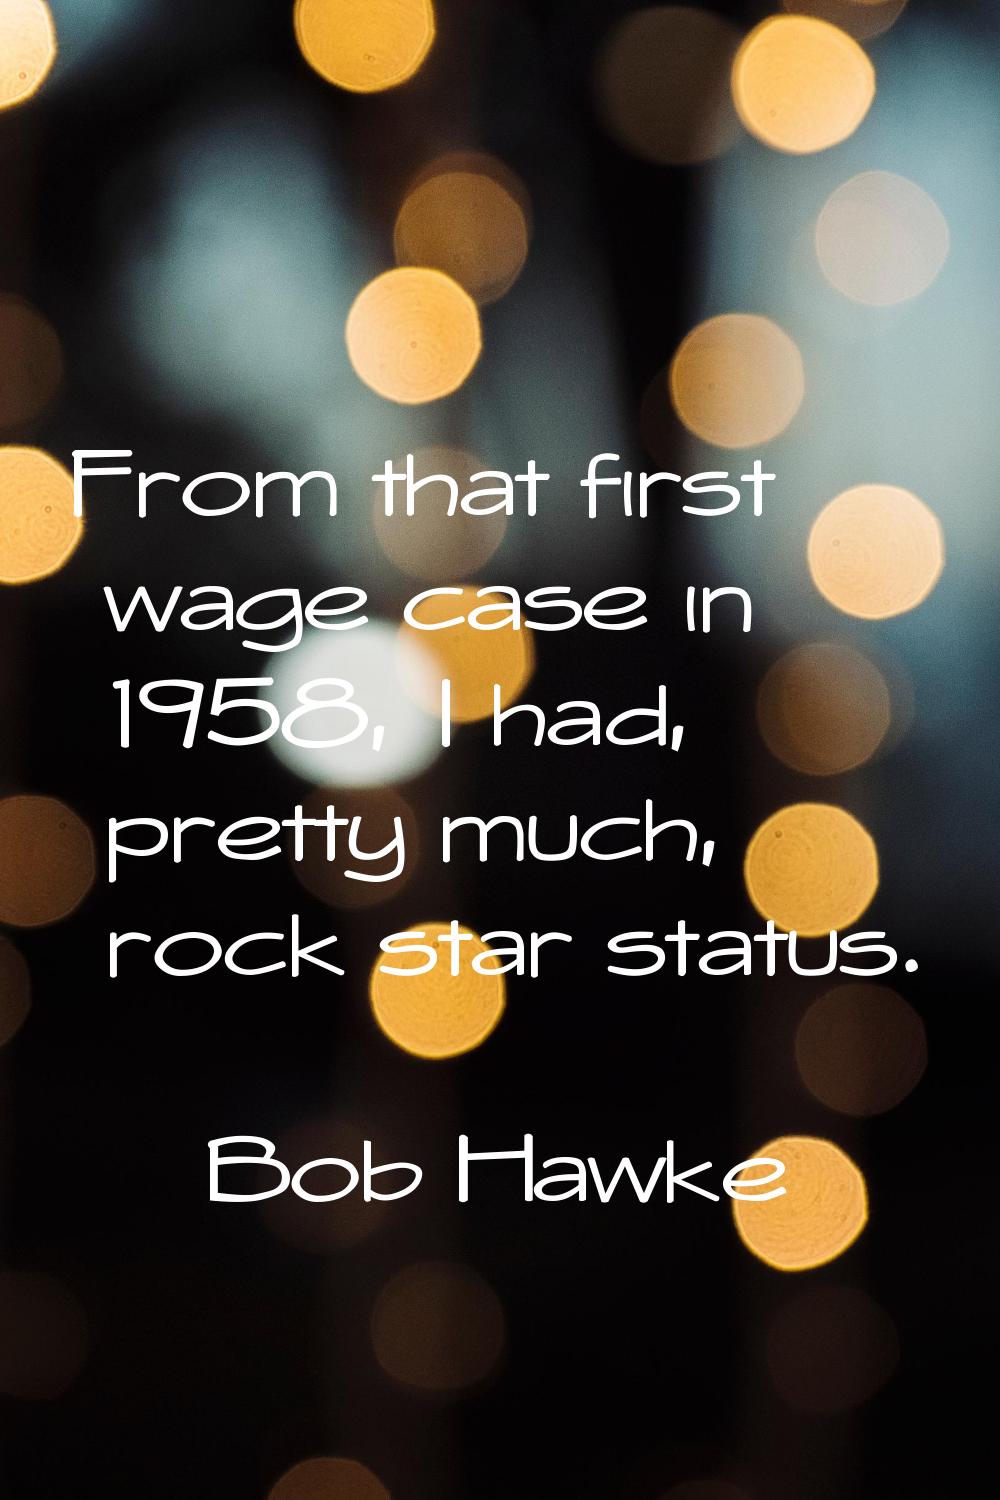 From that first wage case in 1958, I had, pretty much, rock star status.